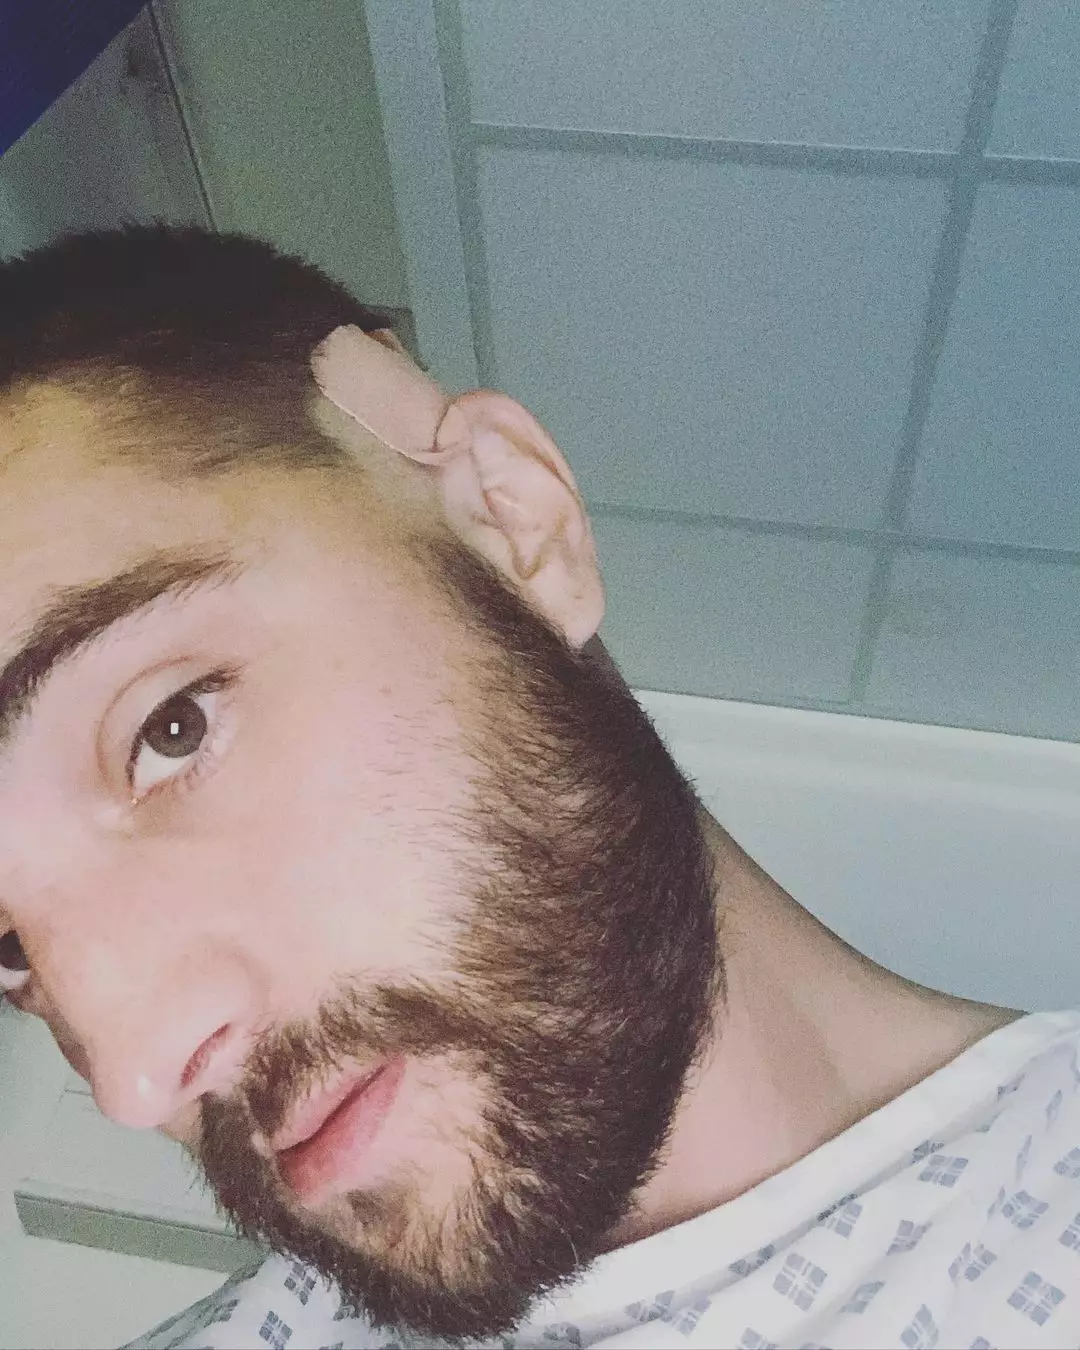 Tom Parker has shared his terminal cancer diagnosis (